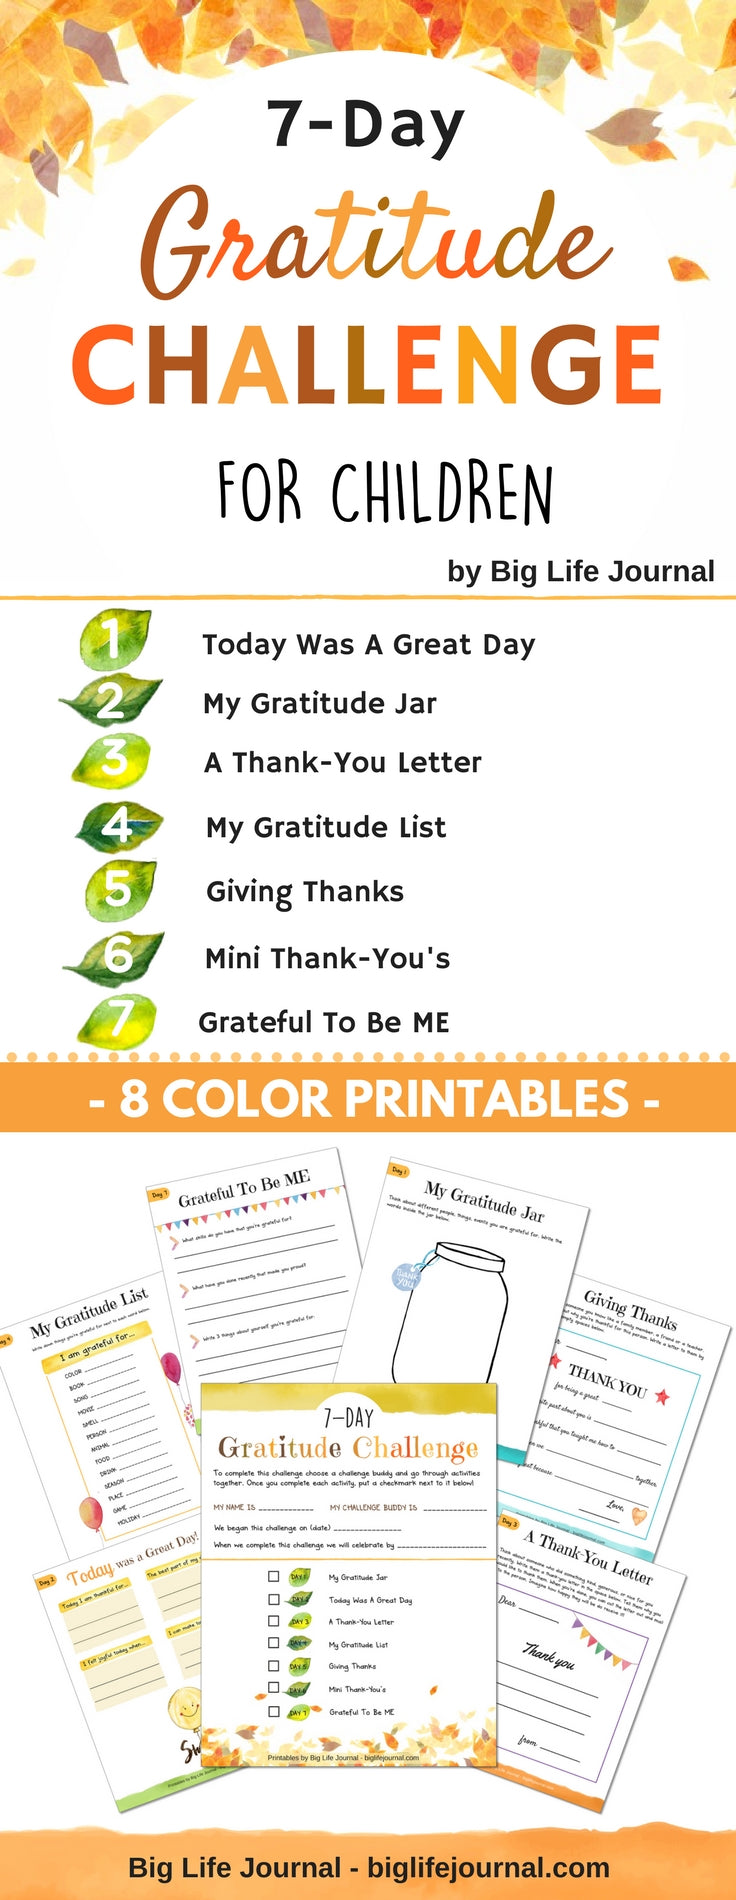 Printable gratitude challenge for children. A great activity for home or a classroom. 